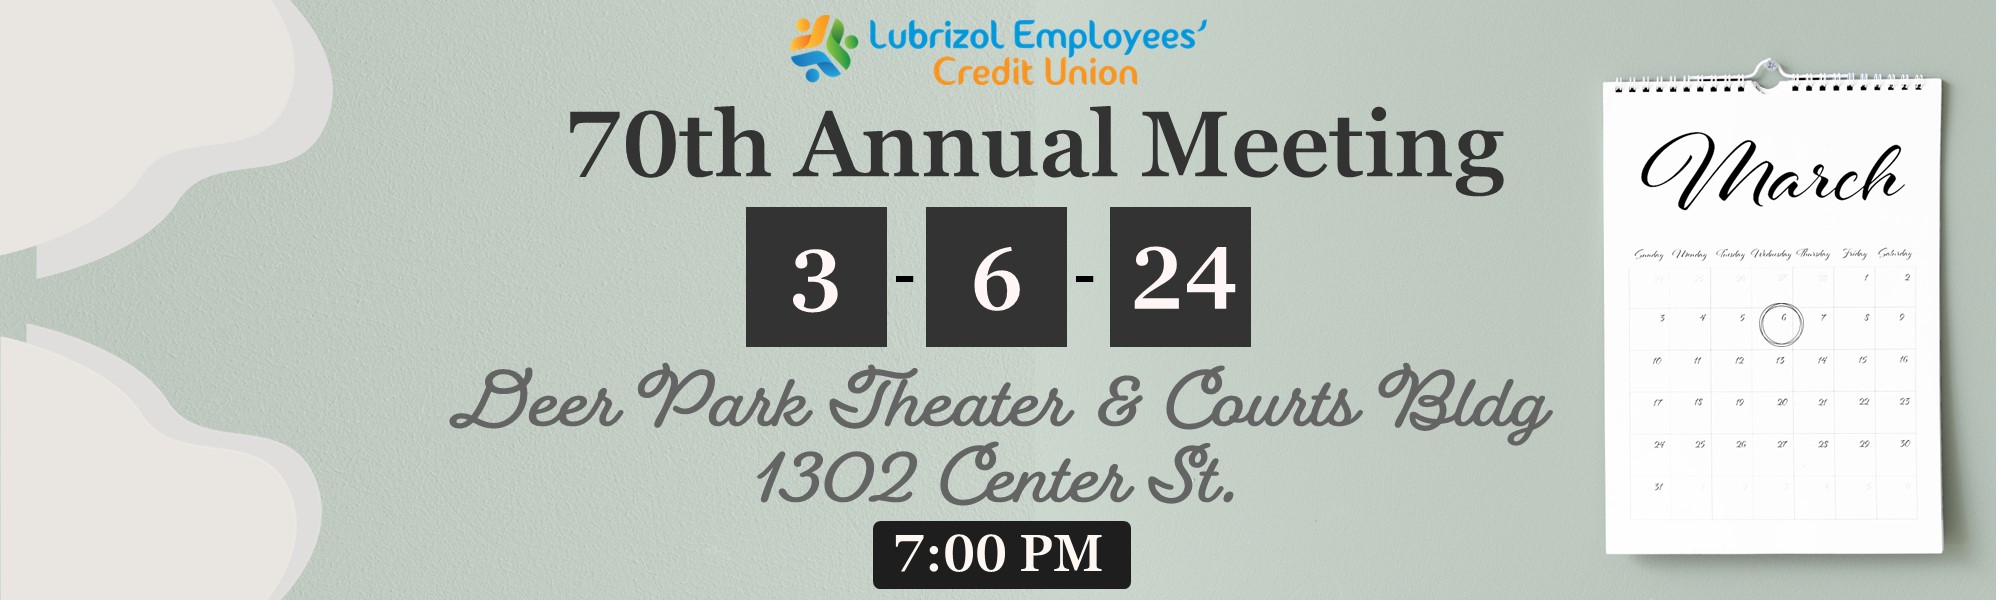 70th Annual Meeting March 6th at 7 pm at the deer park theater and court building